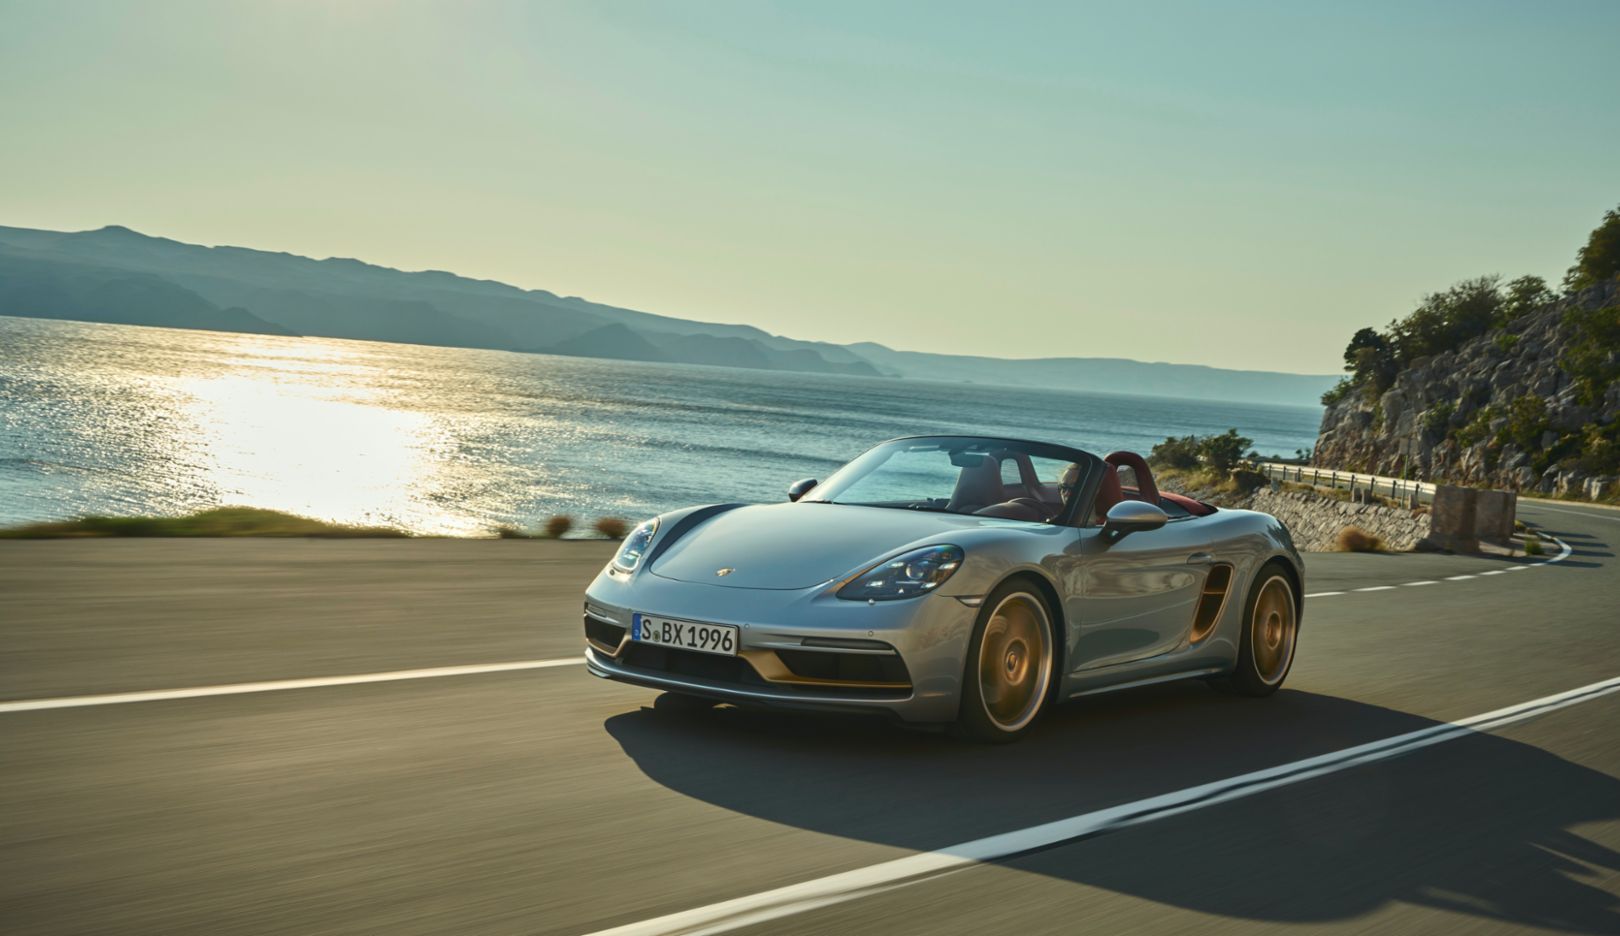 New limited-edition anniversary model: Boxster 25 Years